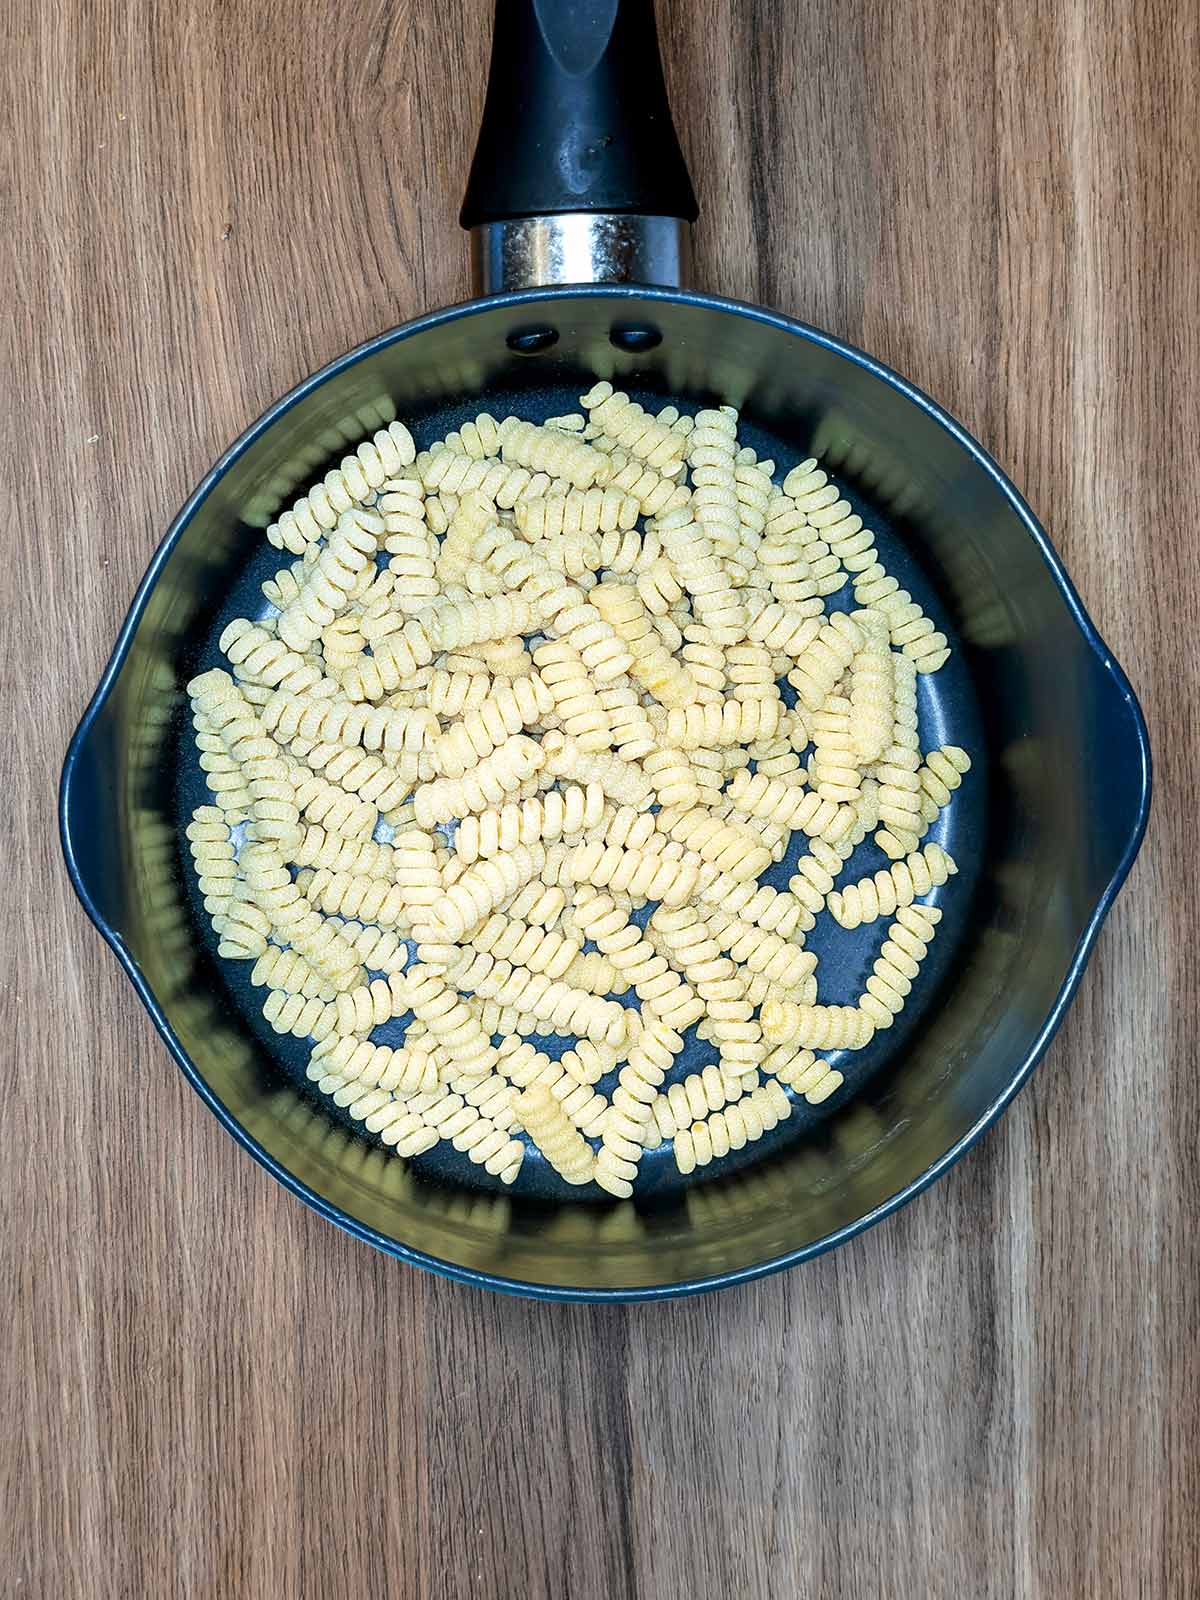 A pan with pasta shapes in it.